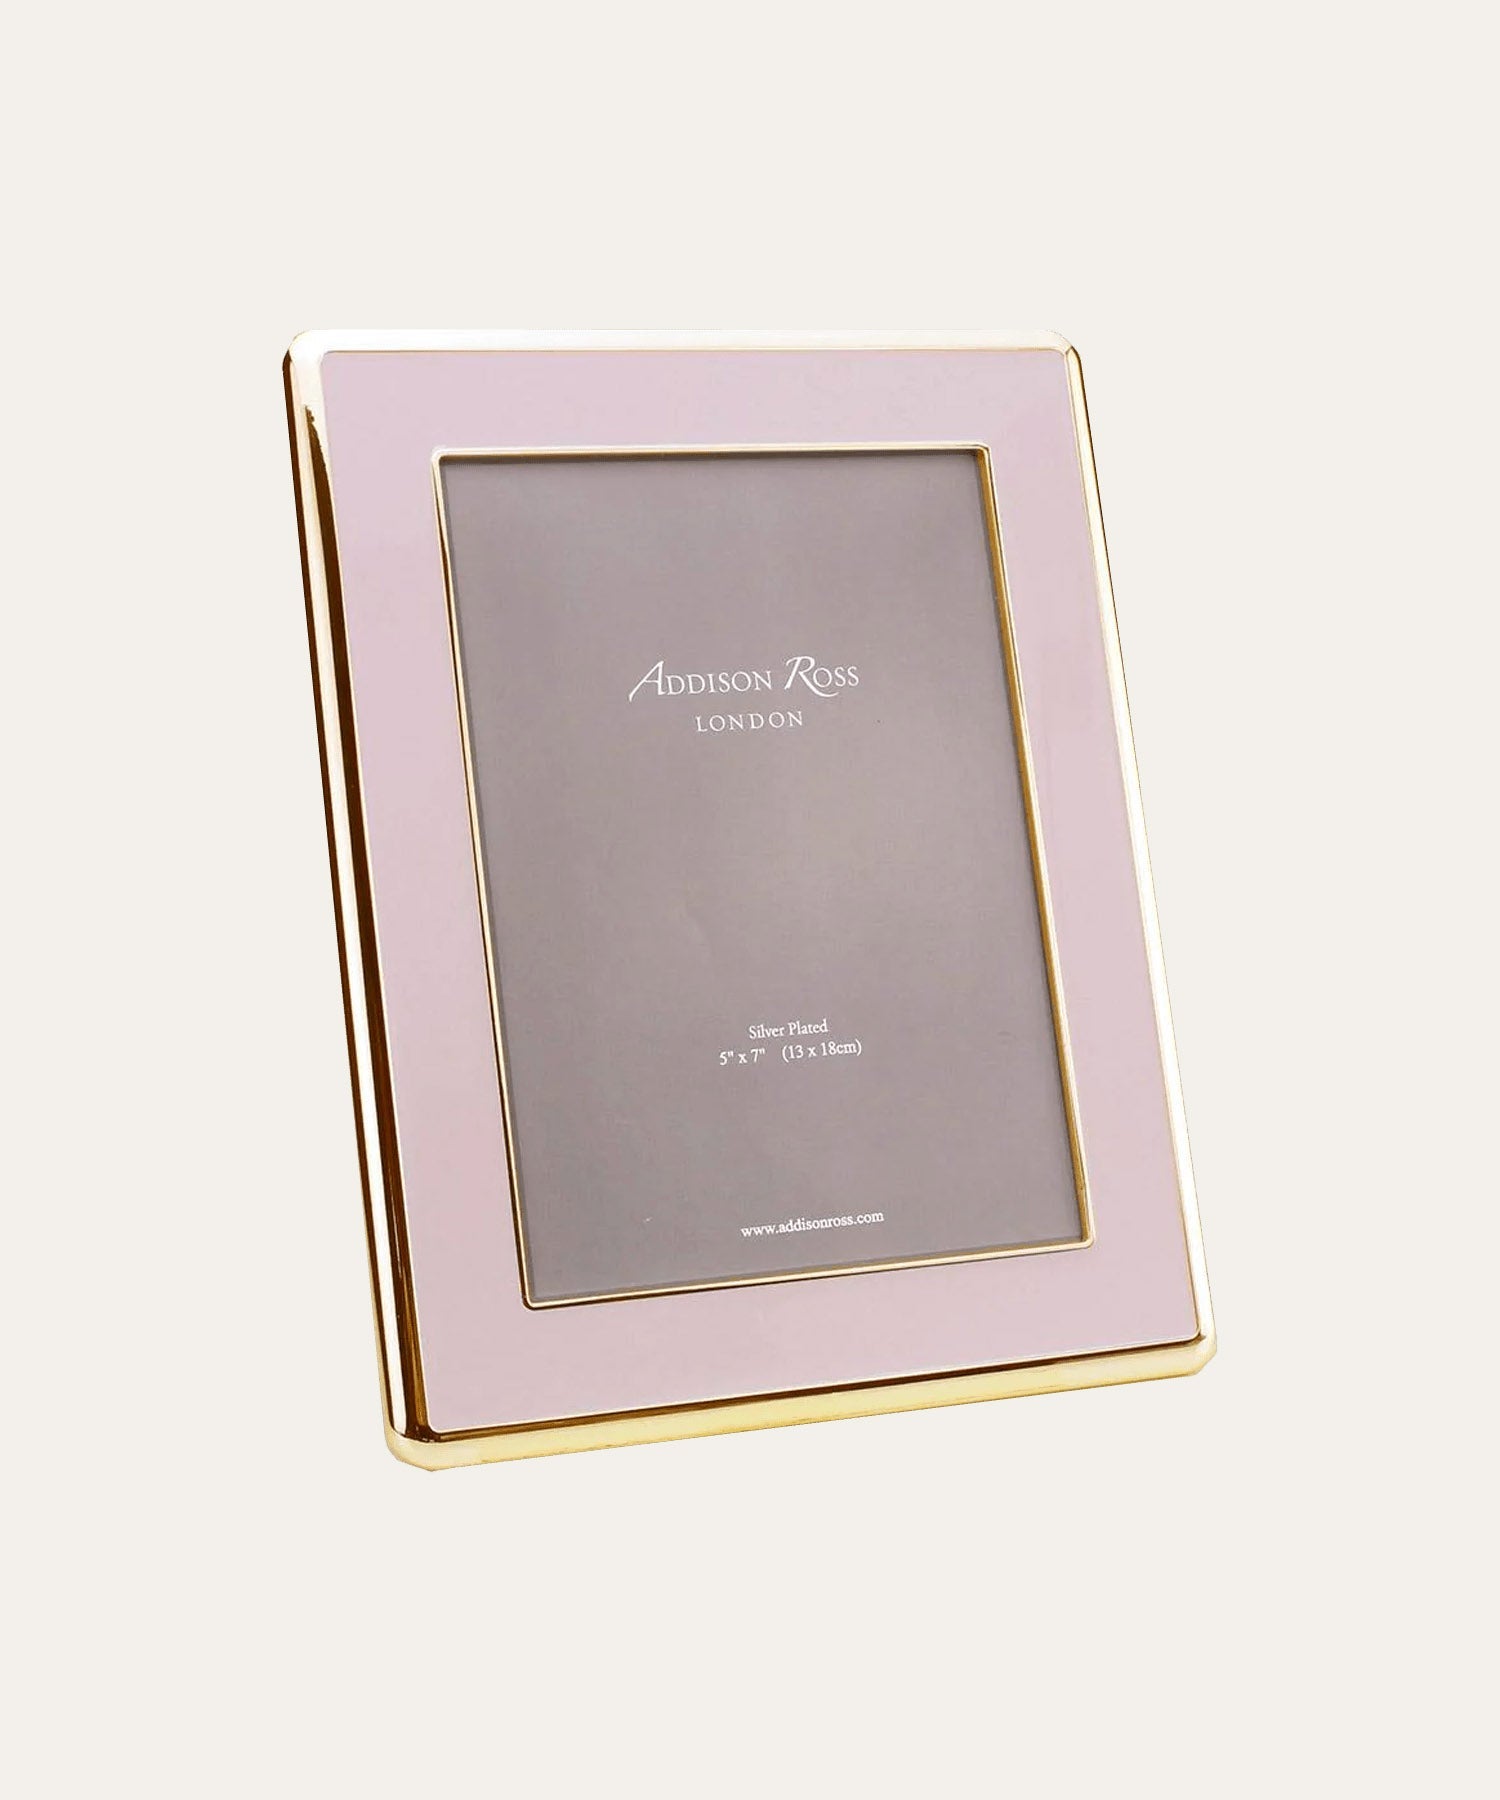 Gold and Pale Pink Frame - Stephenson House